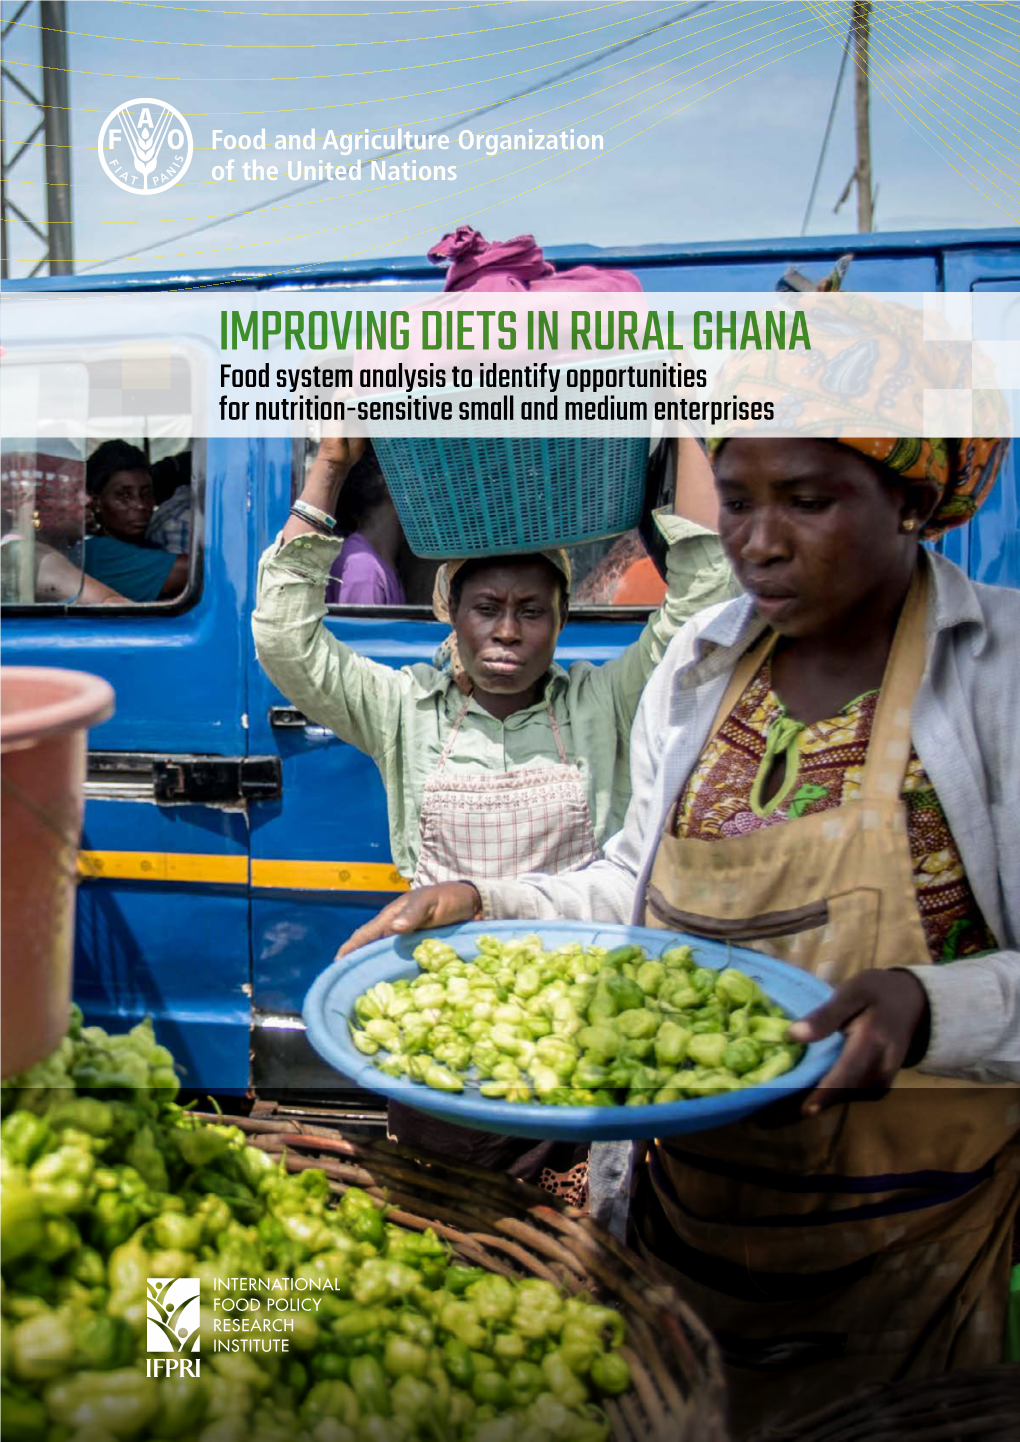 IMPROVING DIETS in RURAL GHANA Food System Analysis to Identify Opportunities for Nutrition-Sensitive Small and Medium Enterprises